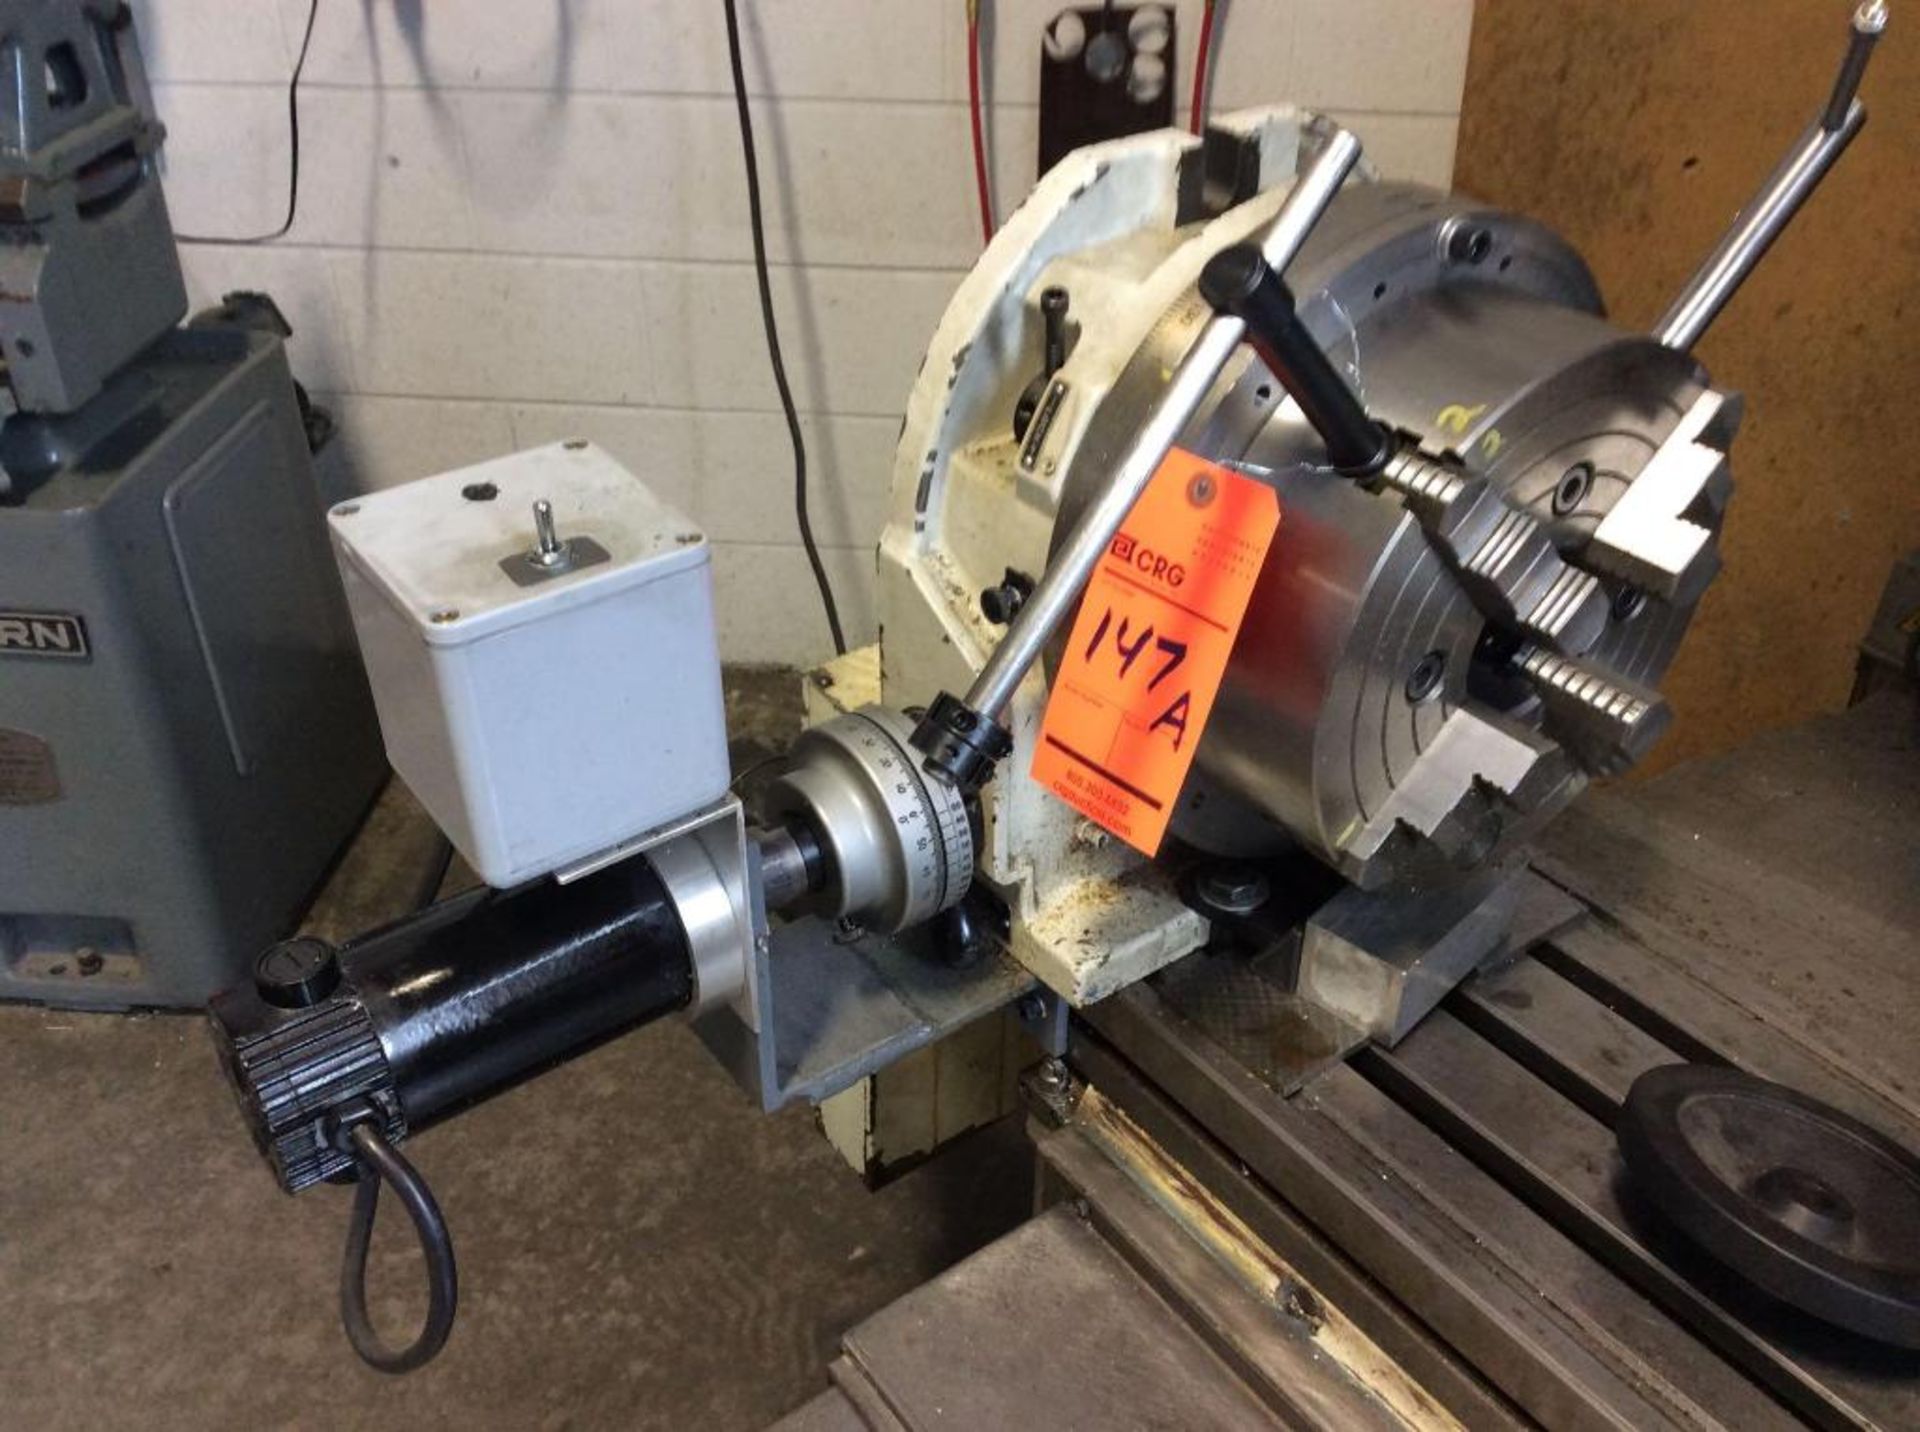 Troyke 12" rotary table, mn U-12 with controls (Used as 4th axis on Fryer milling machine)